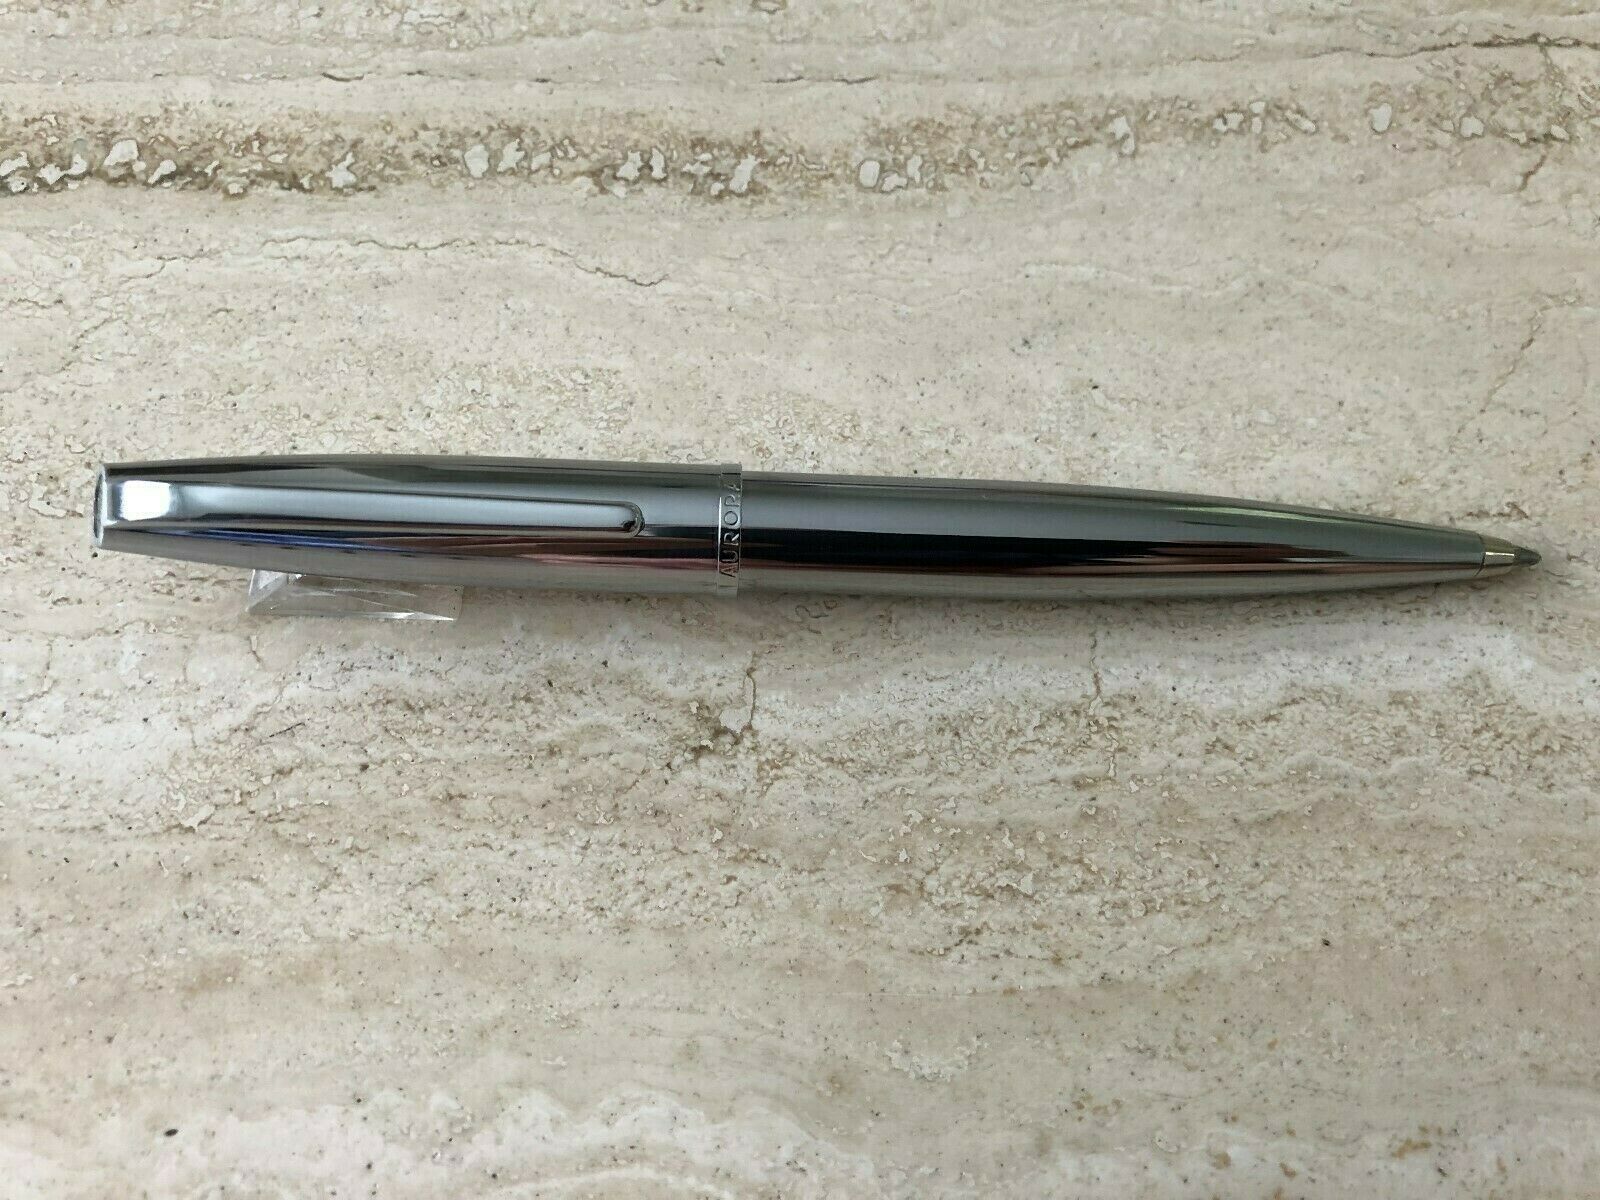 Aurora “style” Ballpoint Pen – Polished Chrome Lacquer - New, Unused Old Stock